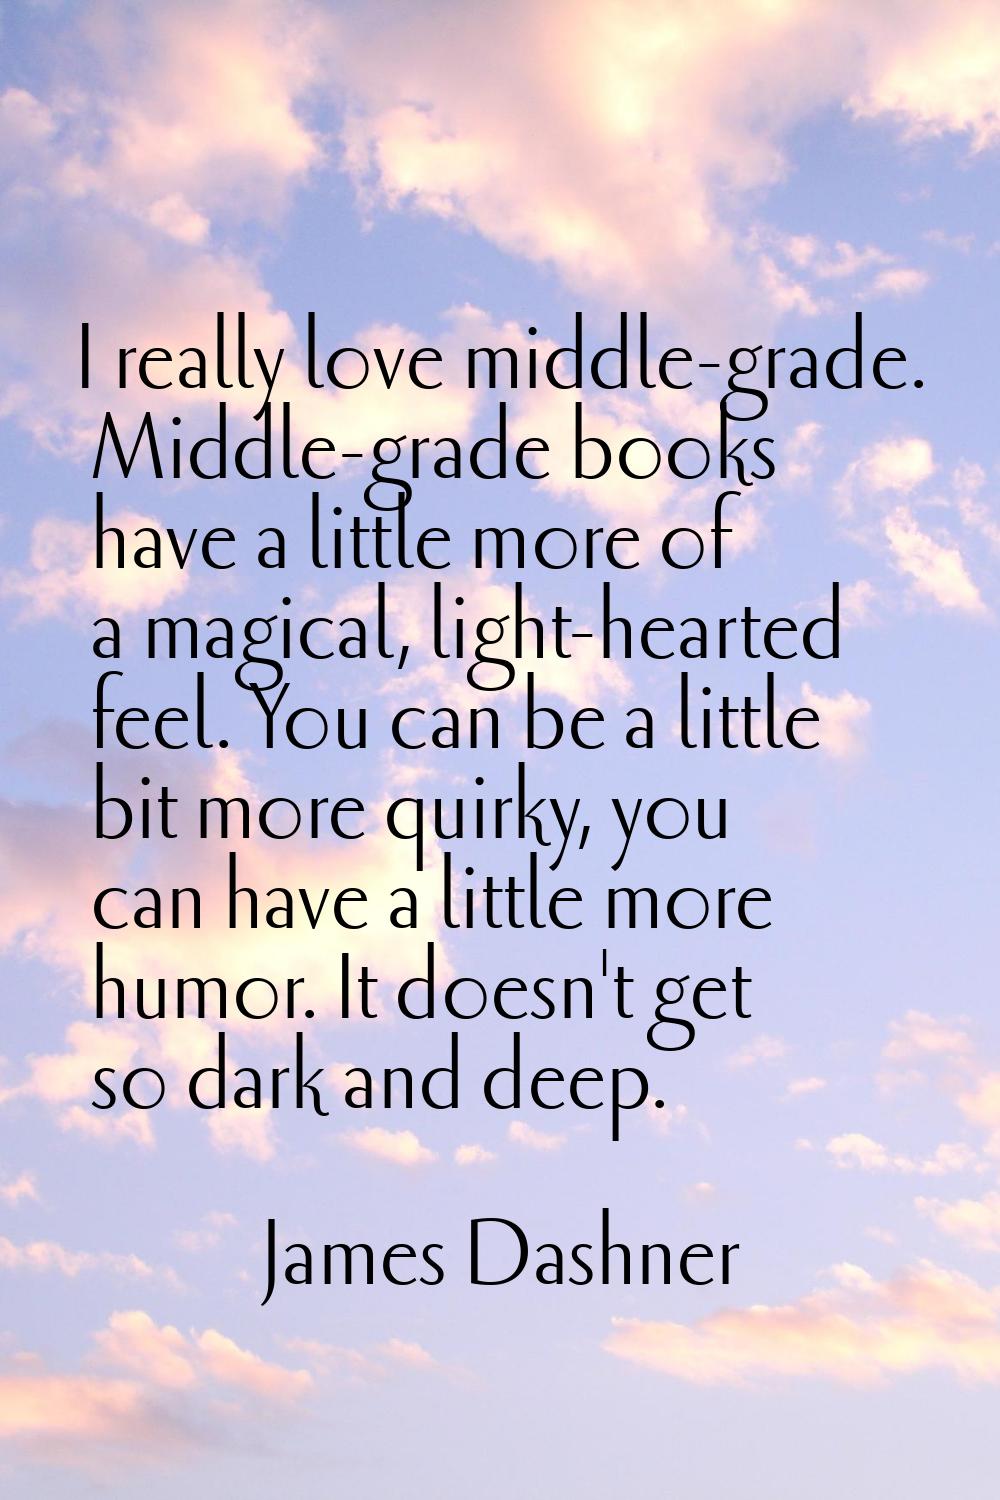 I really love middle-grade. Middle-grade books have a little more of a magical, light-hearted feel.